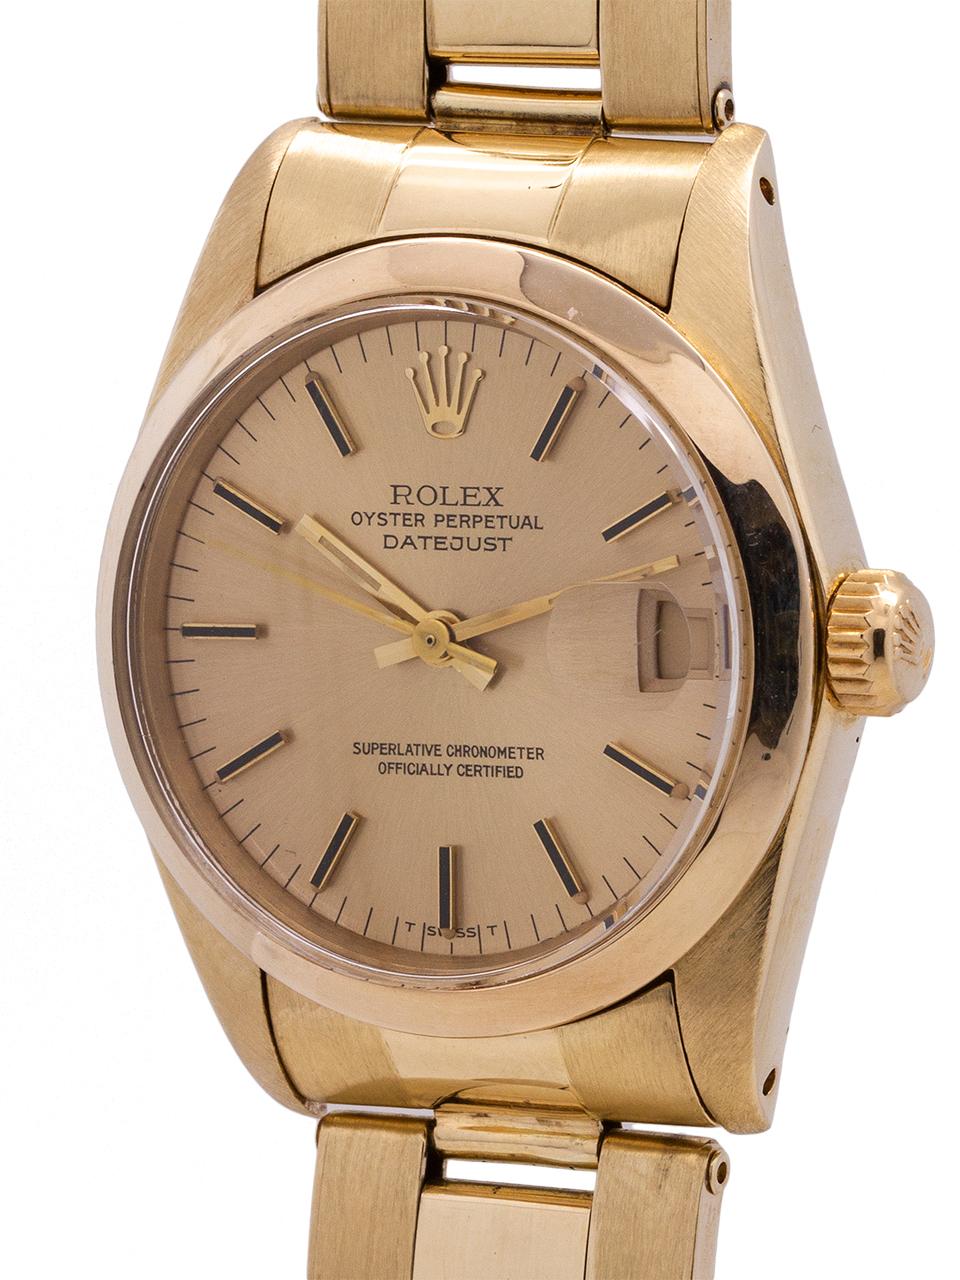 
Rolex midsize Datejust 18K YG ref 6827 case serial # 6.7 million circa 1981. Featuring 31mm diameter case with smooth bezel, acrylic crystal and original champagne dial with applied gold indexes and gold baton hands. Powered by self winding caliber